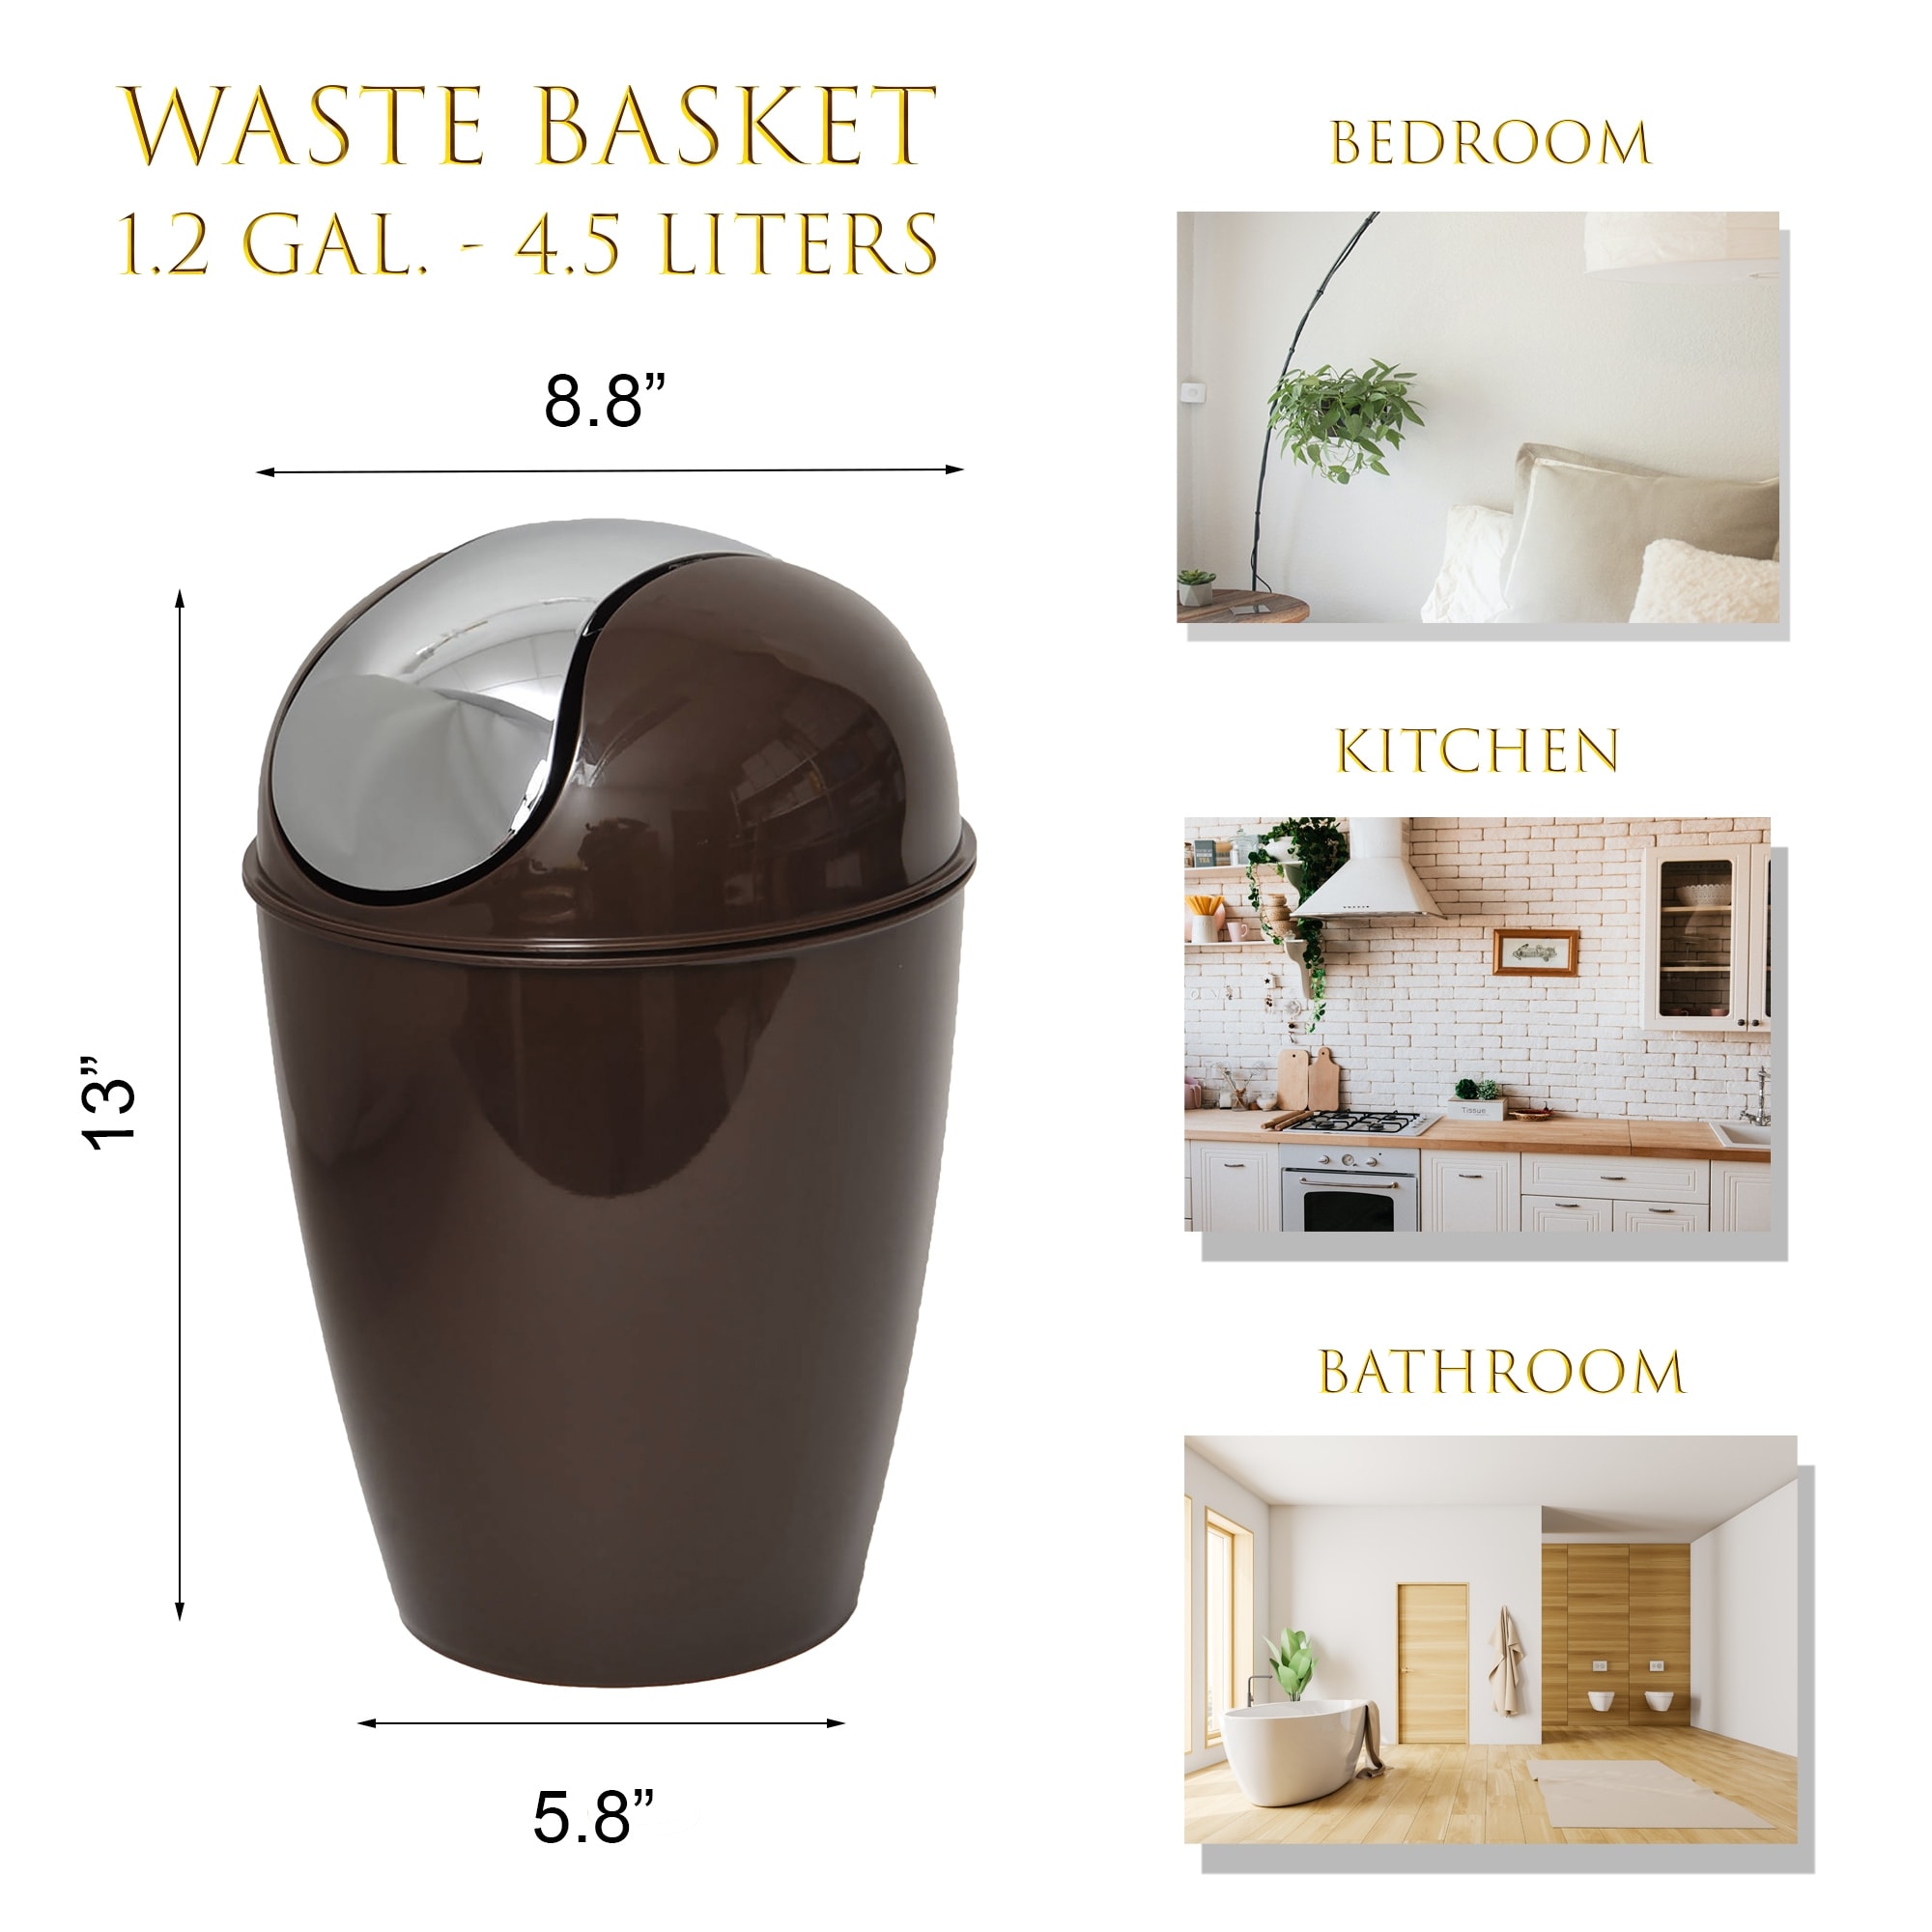 https://ak1.ostkcdn.com/images/products/is/images/direct/9f335416efbef4d7ecbe204faa151c283d45d8ab/Round-Floor-Trash-Can-Waste-Basket-4.5-liters-1.2-gal.jpg